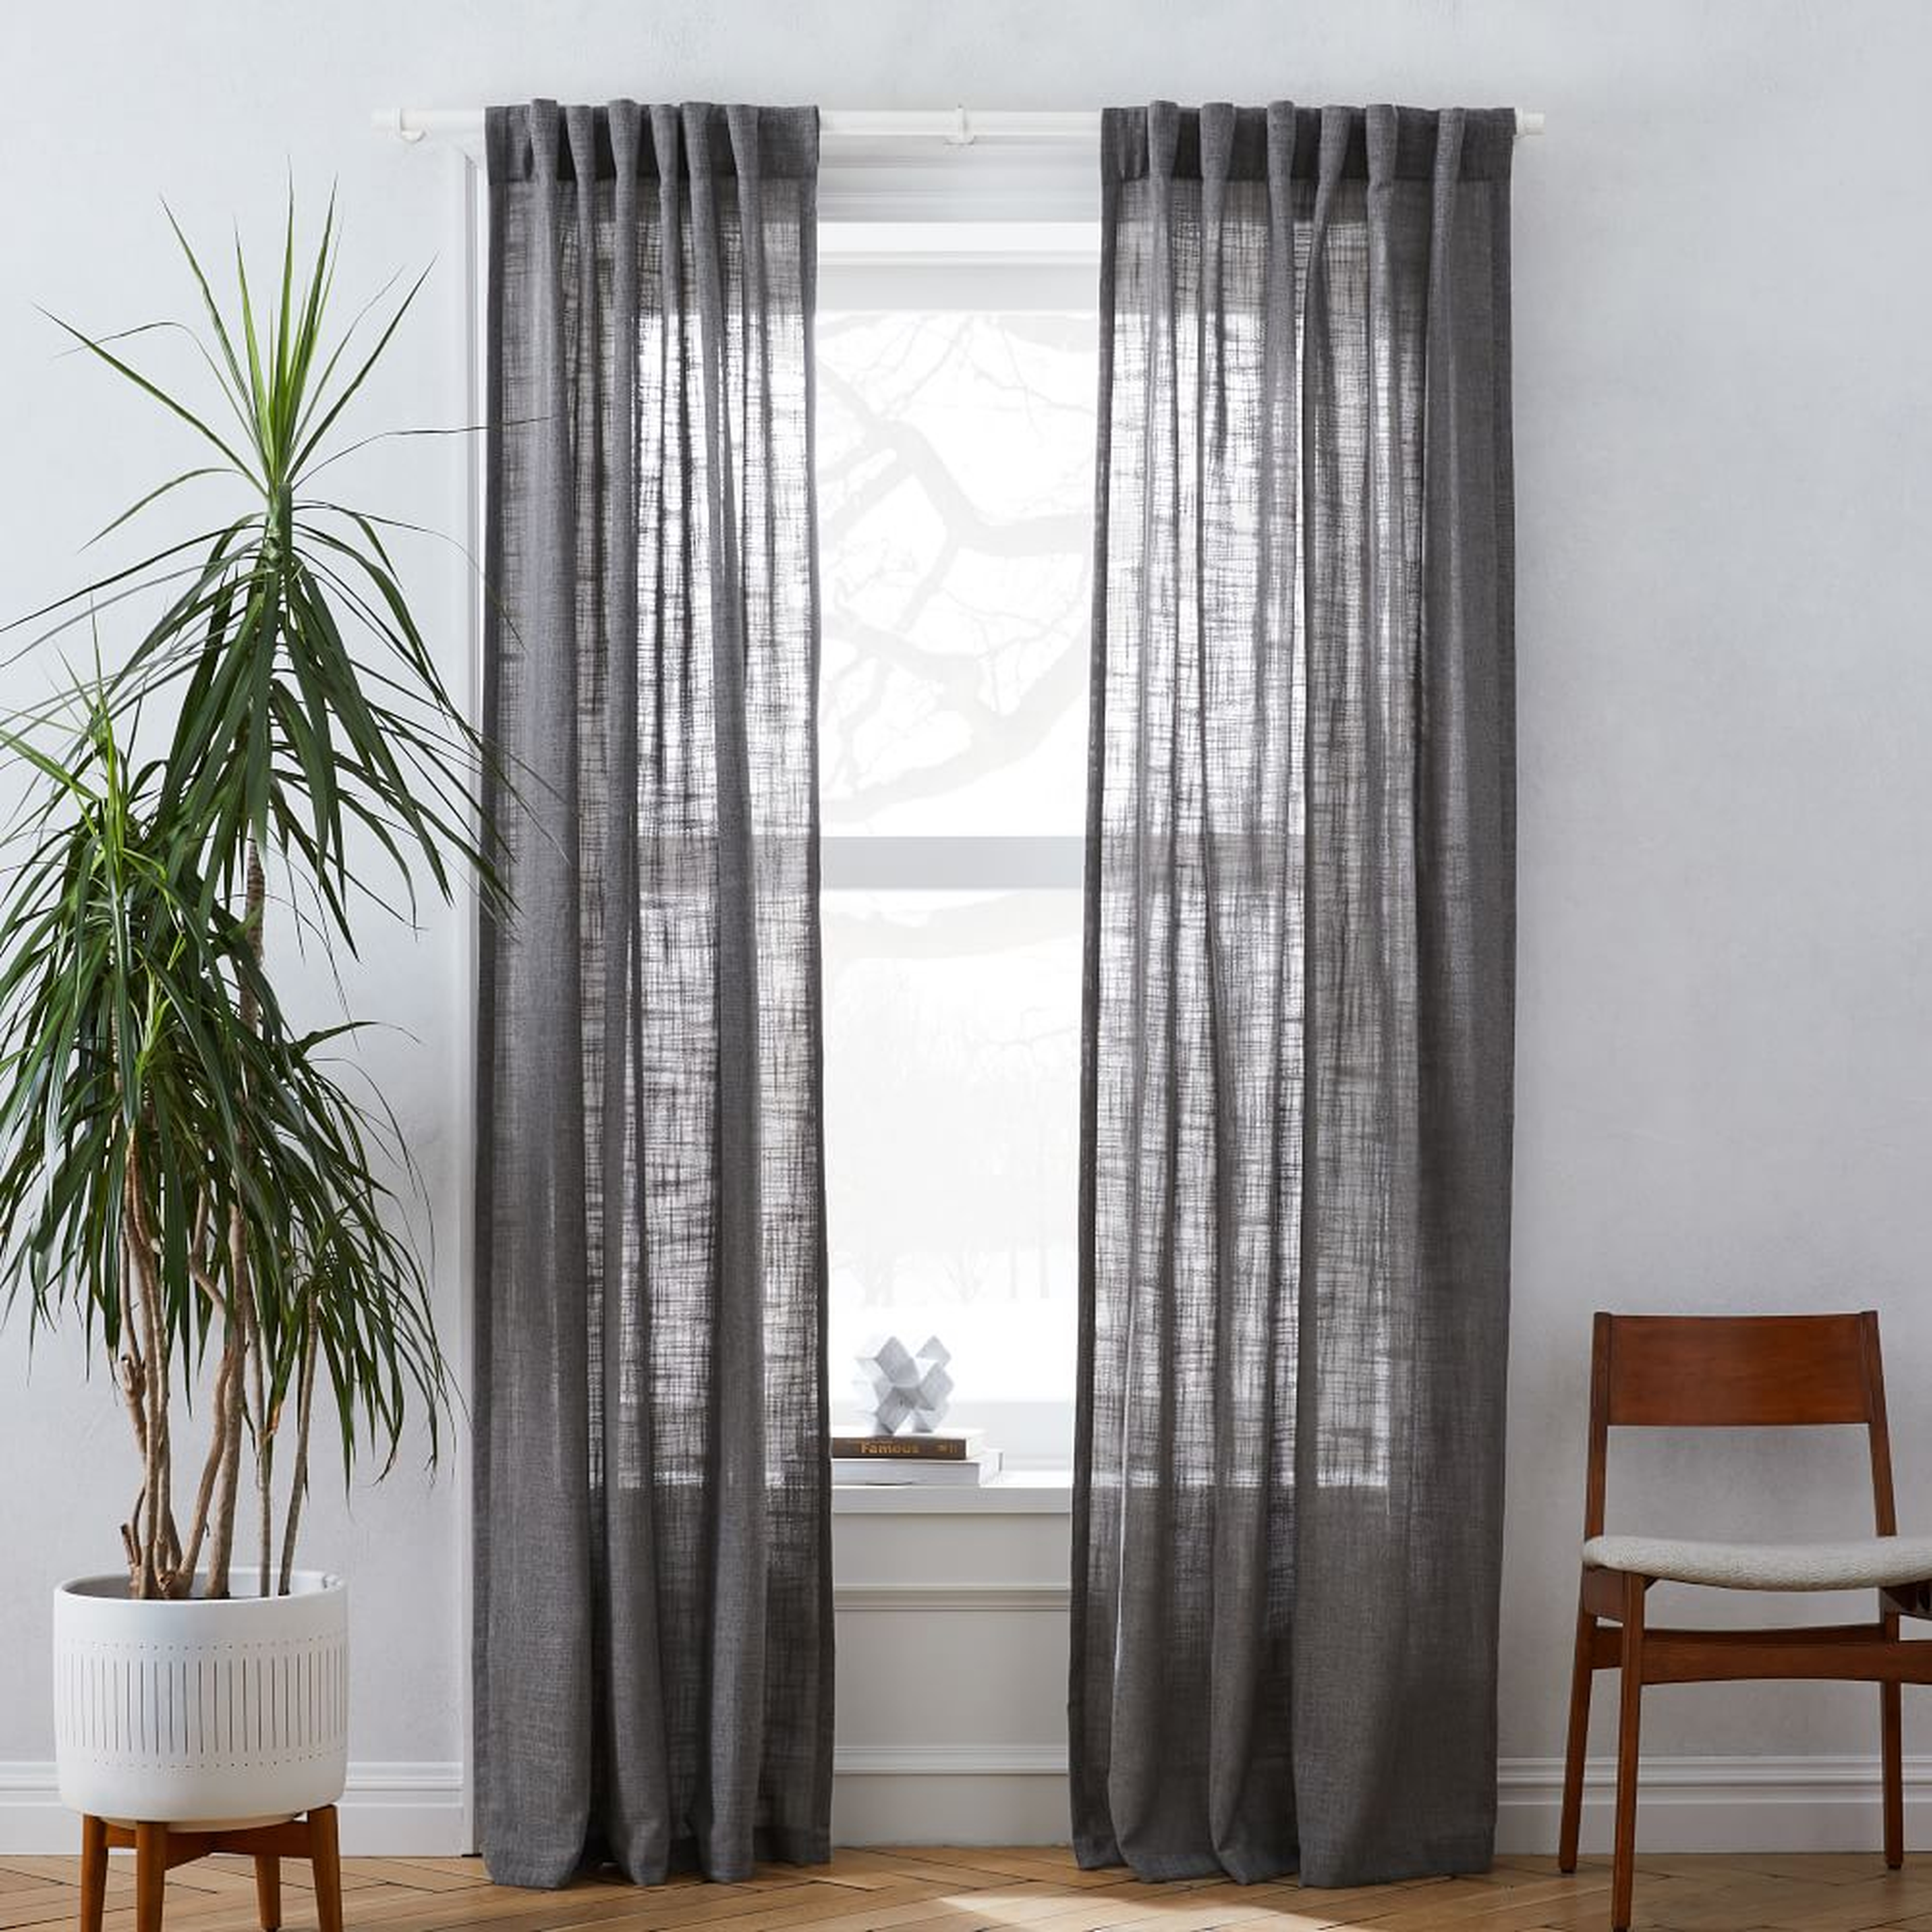 Crossweave Curtain with Blackout Lining, Charcoal, 48"X96" - West Elm